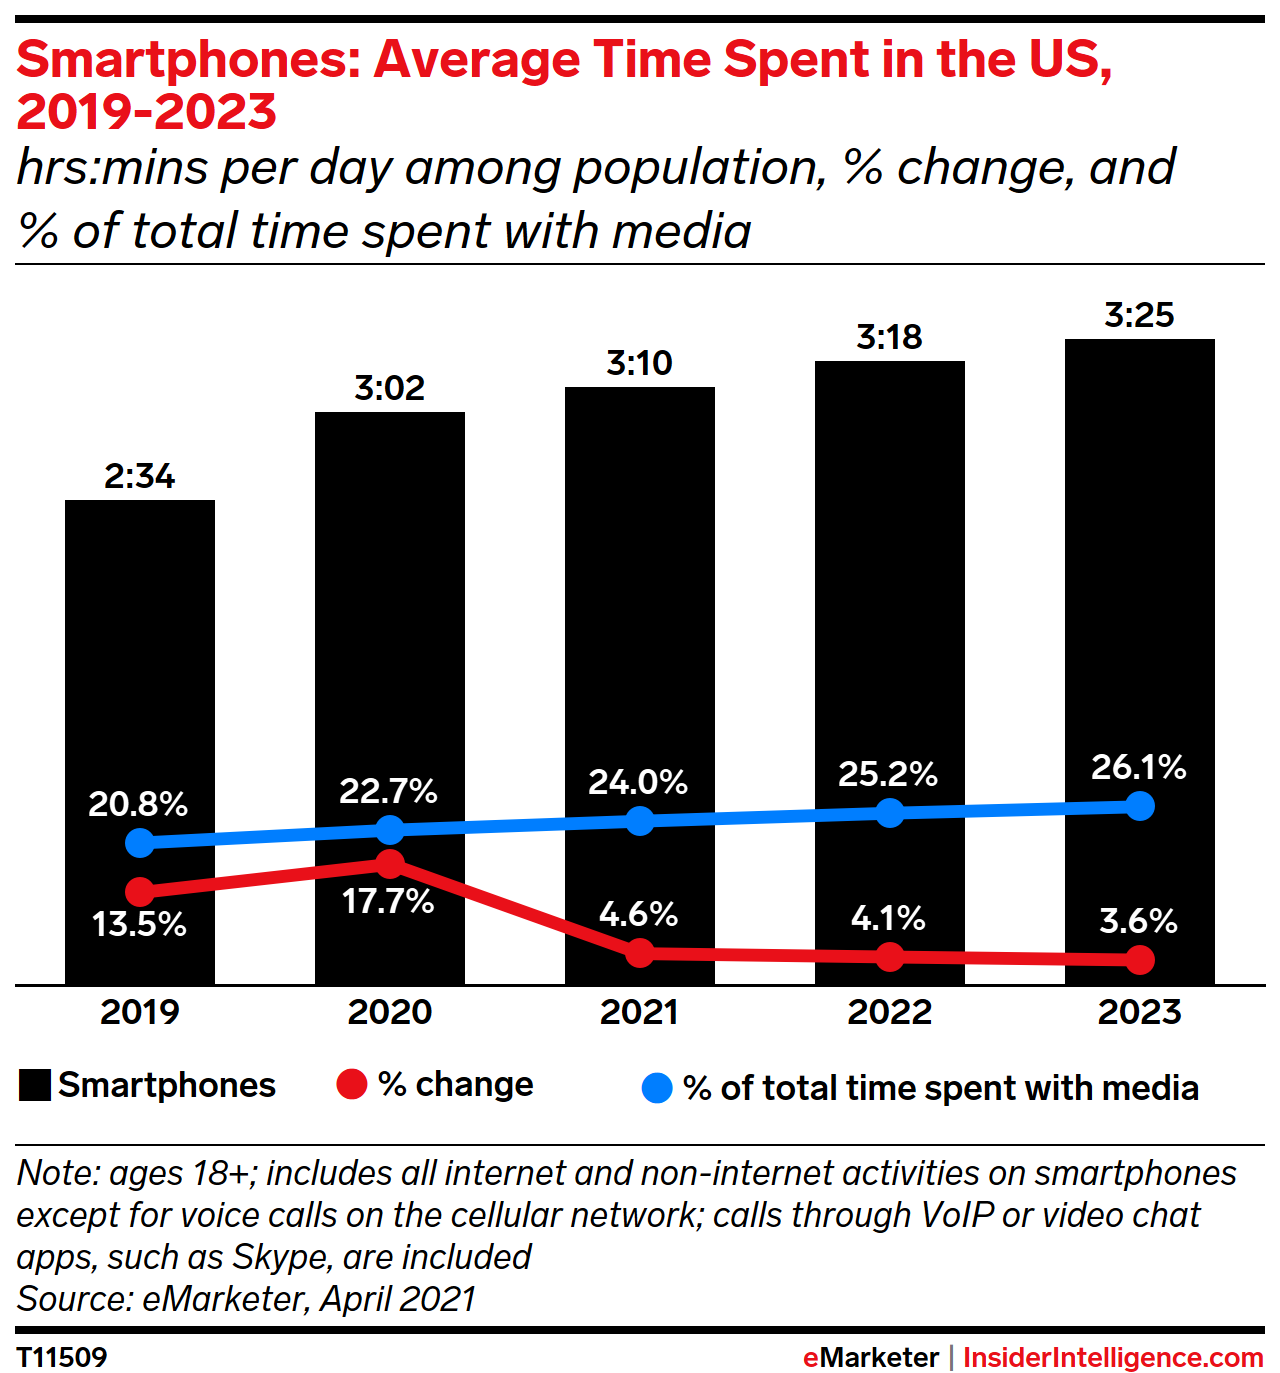 Smartphones: Average Time Spent with Media in the US, 2019-2023 (hrs:mins per day among population, % change, and % of total time spent with media)